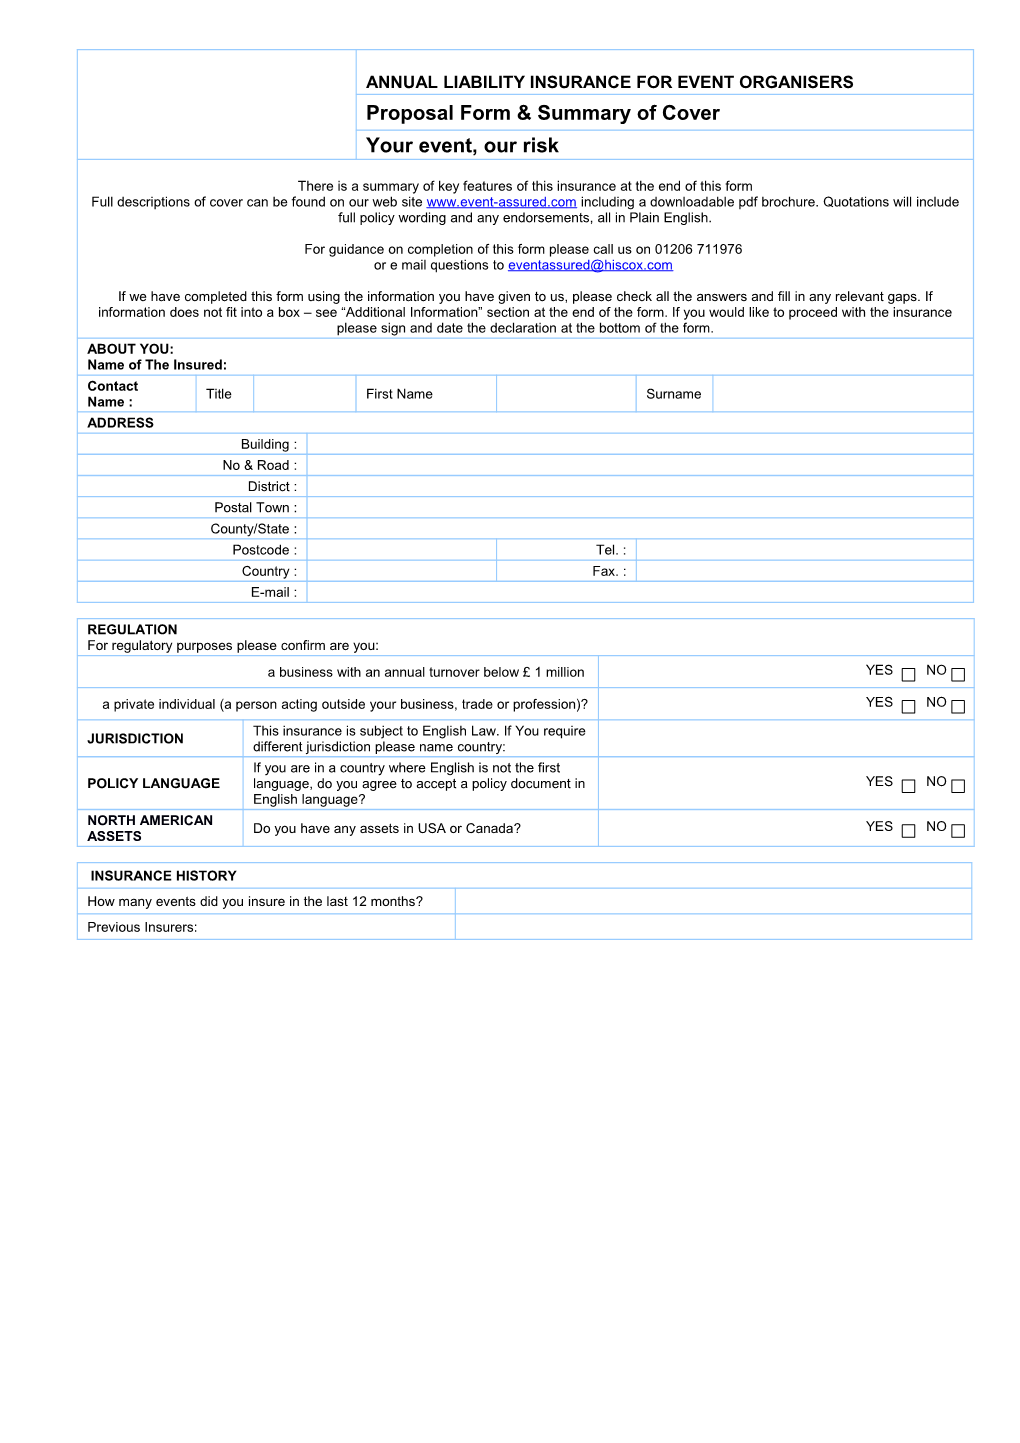 Proposal Form & Summary of Cover